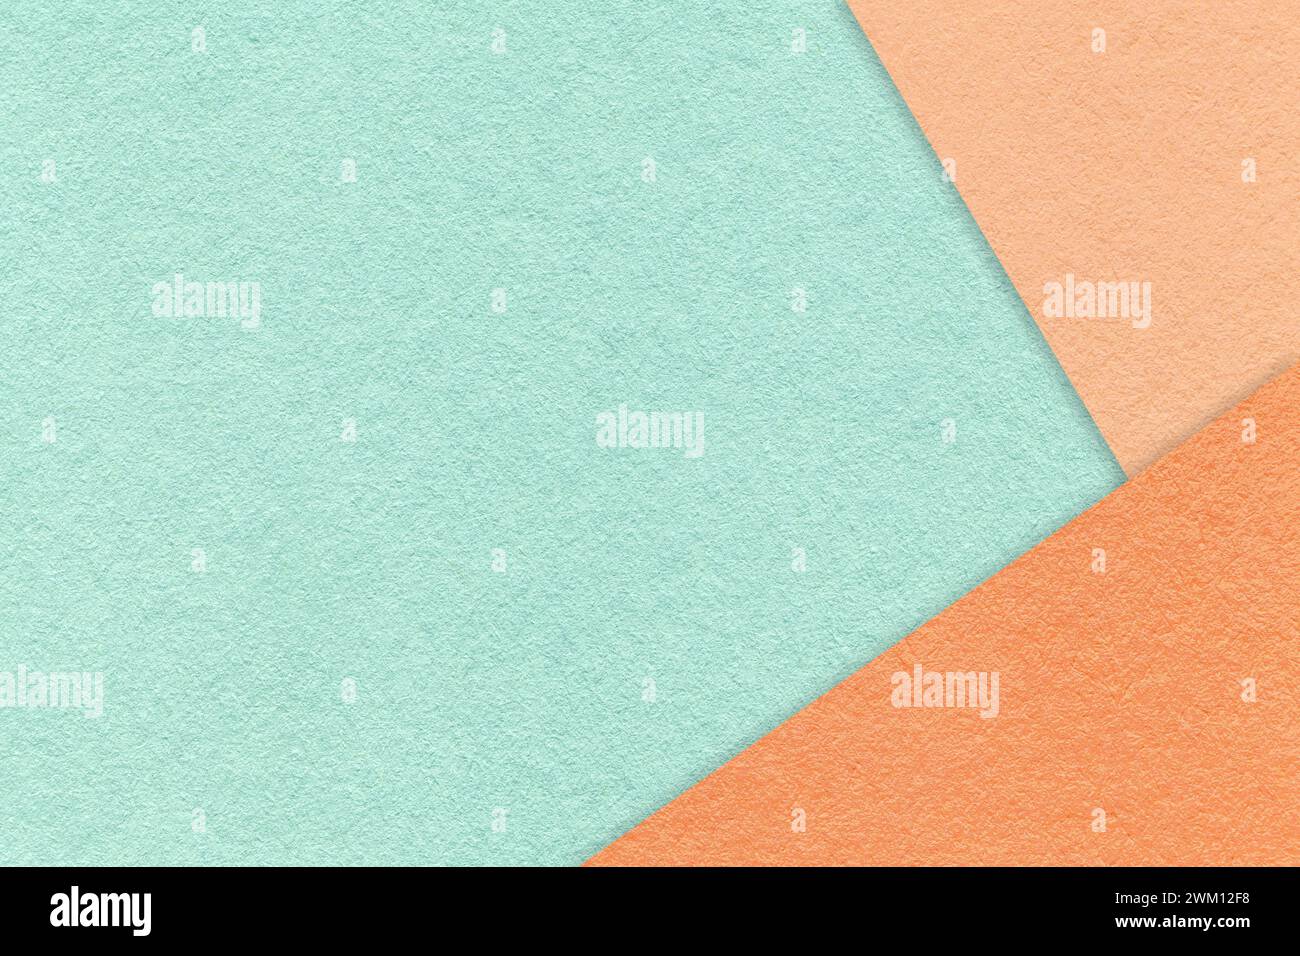 Texture of craft light cyan color paper background with peach fuzz and coral border. Vintage abstract mint cardboard. Presentation template and mockup Stock Photo